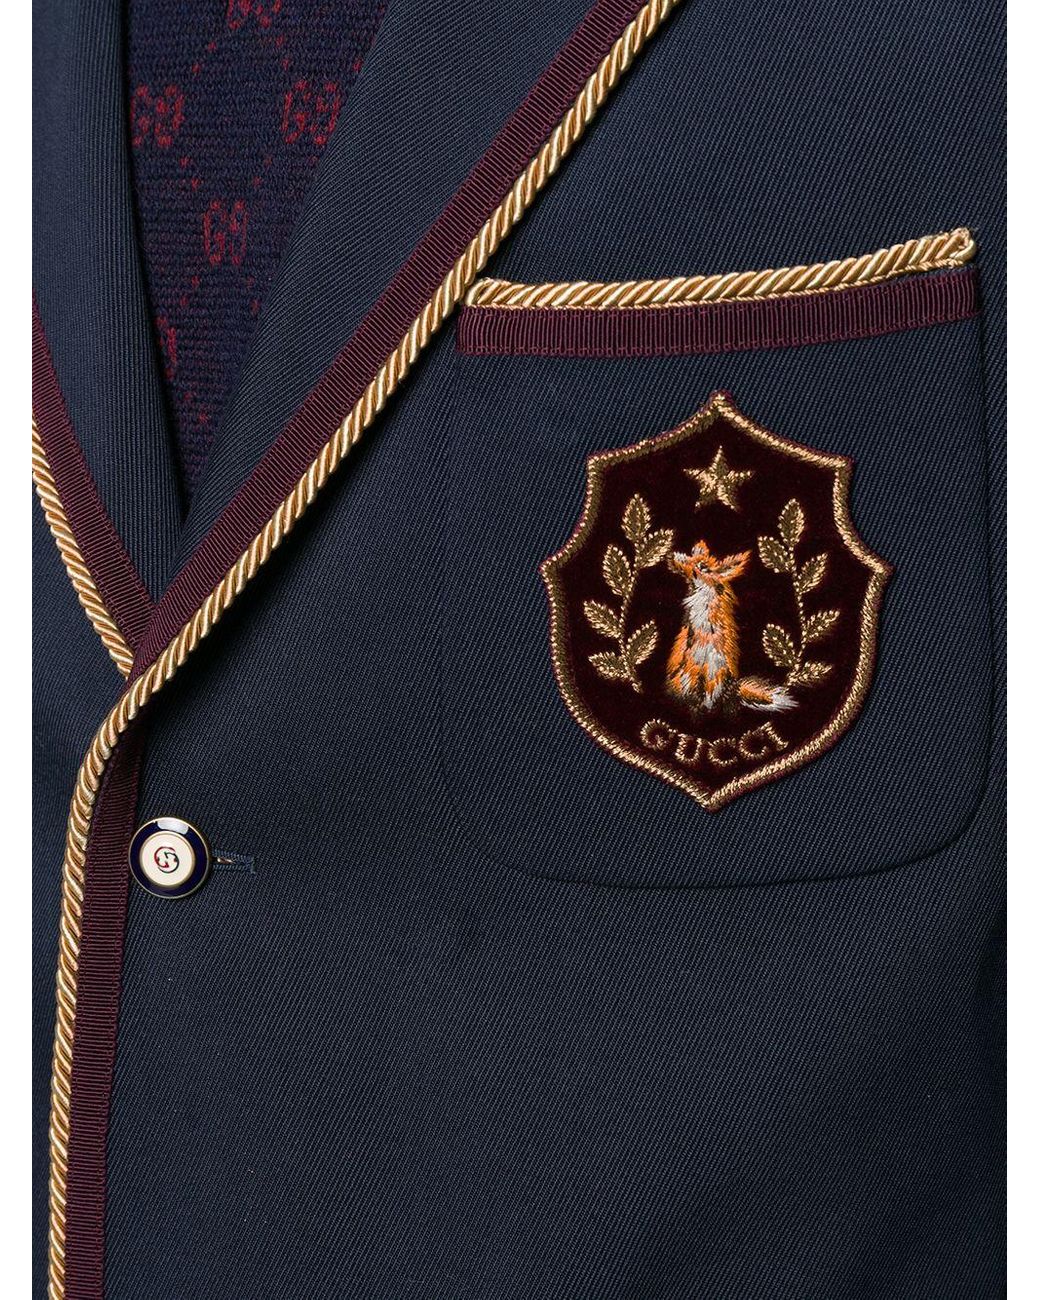 Gucci Cotton Embroidered Logo Patch Blazer in Blue for Men - Lyst